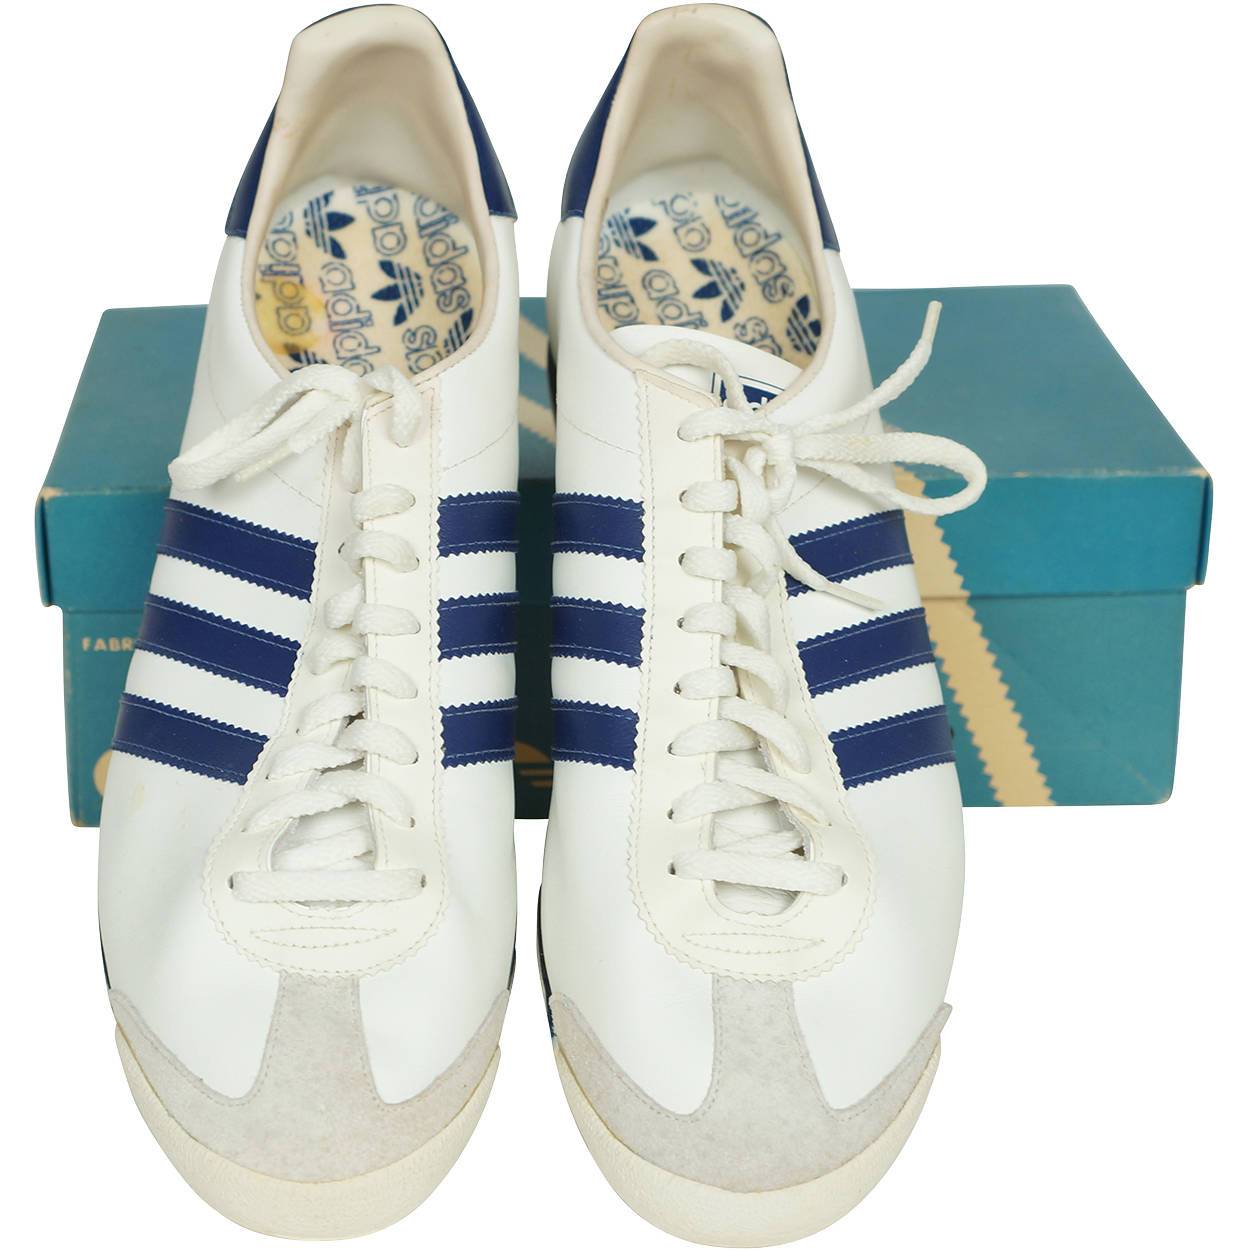 Rare Vintage 1970s Adidas Running Shoes 